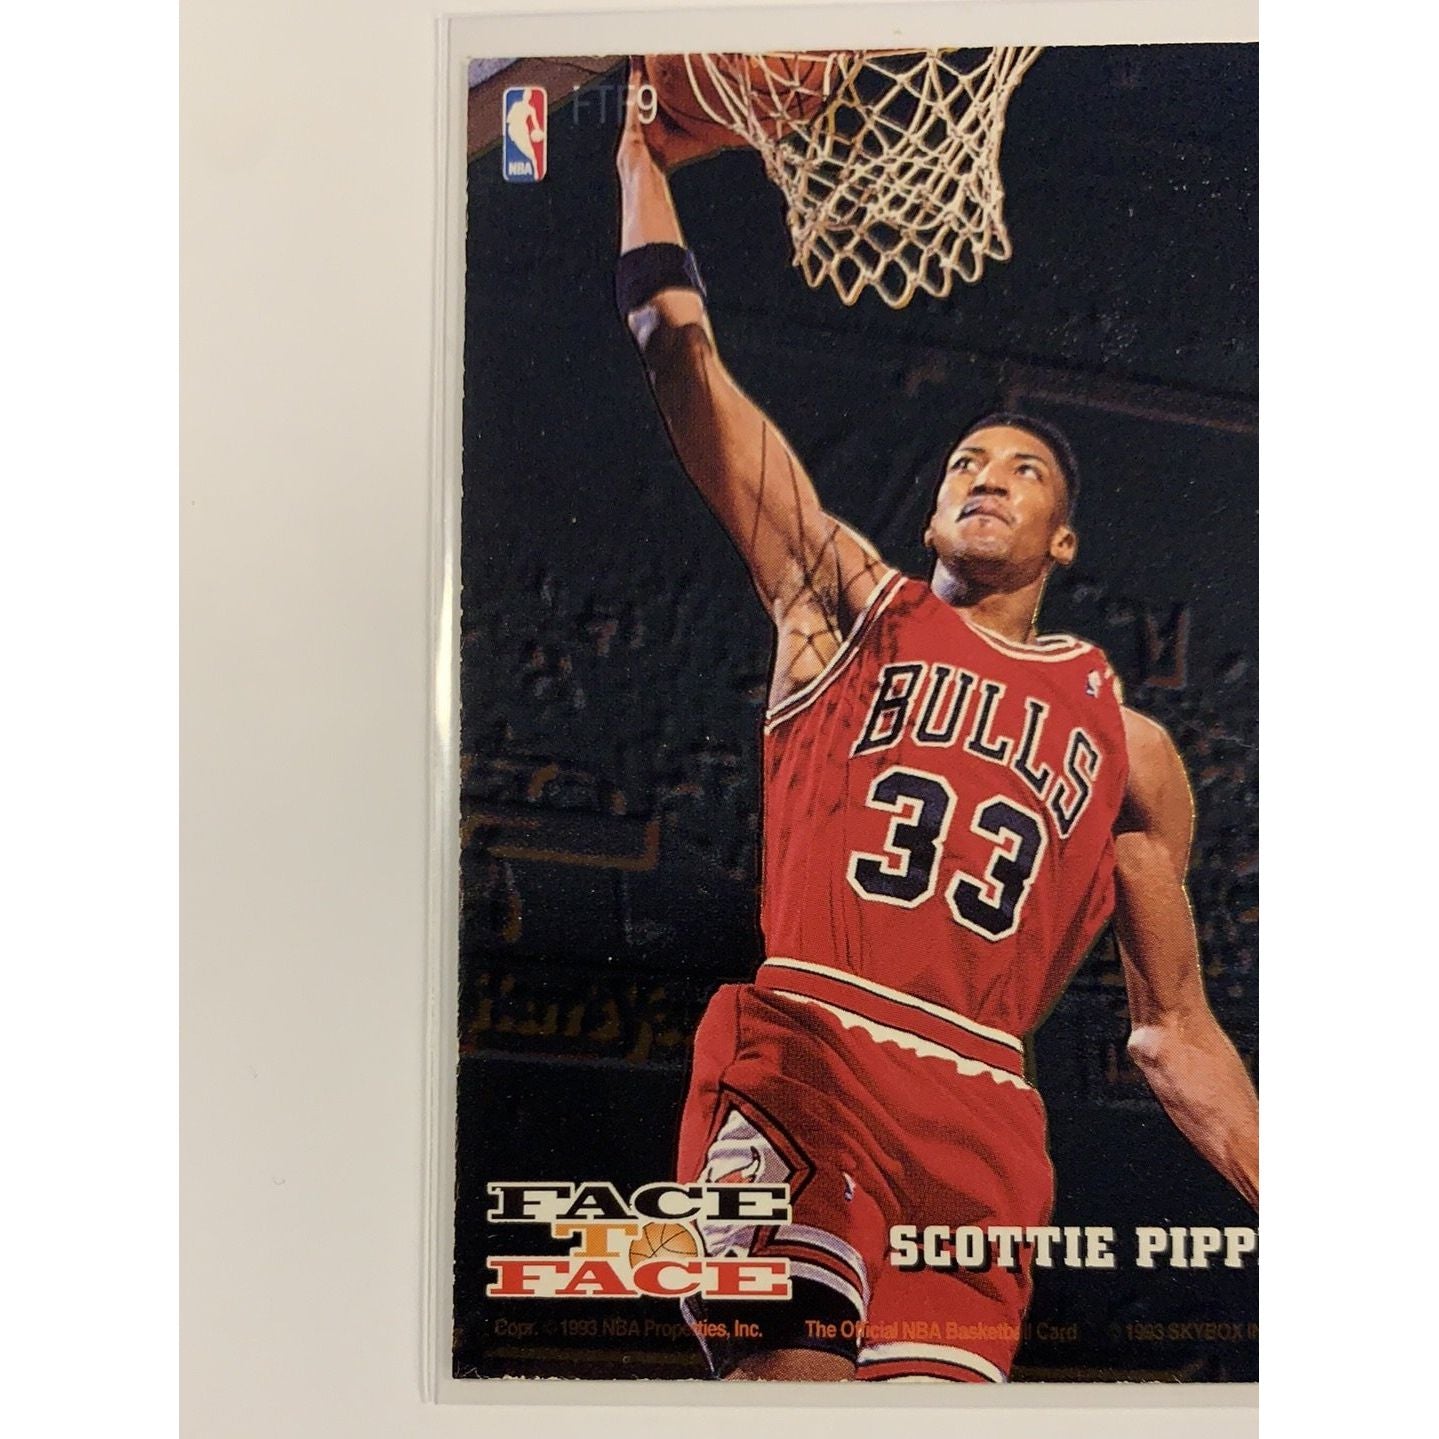  1993-94 NBA Hoops Scottie Pippen / Robert Horry Face To Face  Local Legends Cards & Collectibles